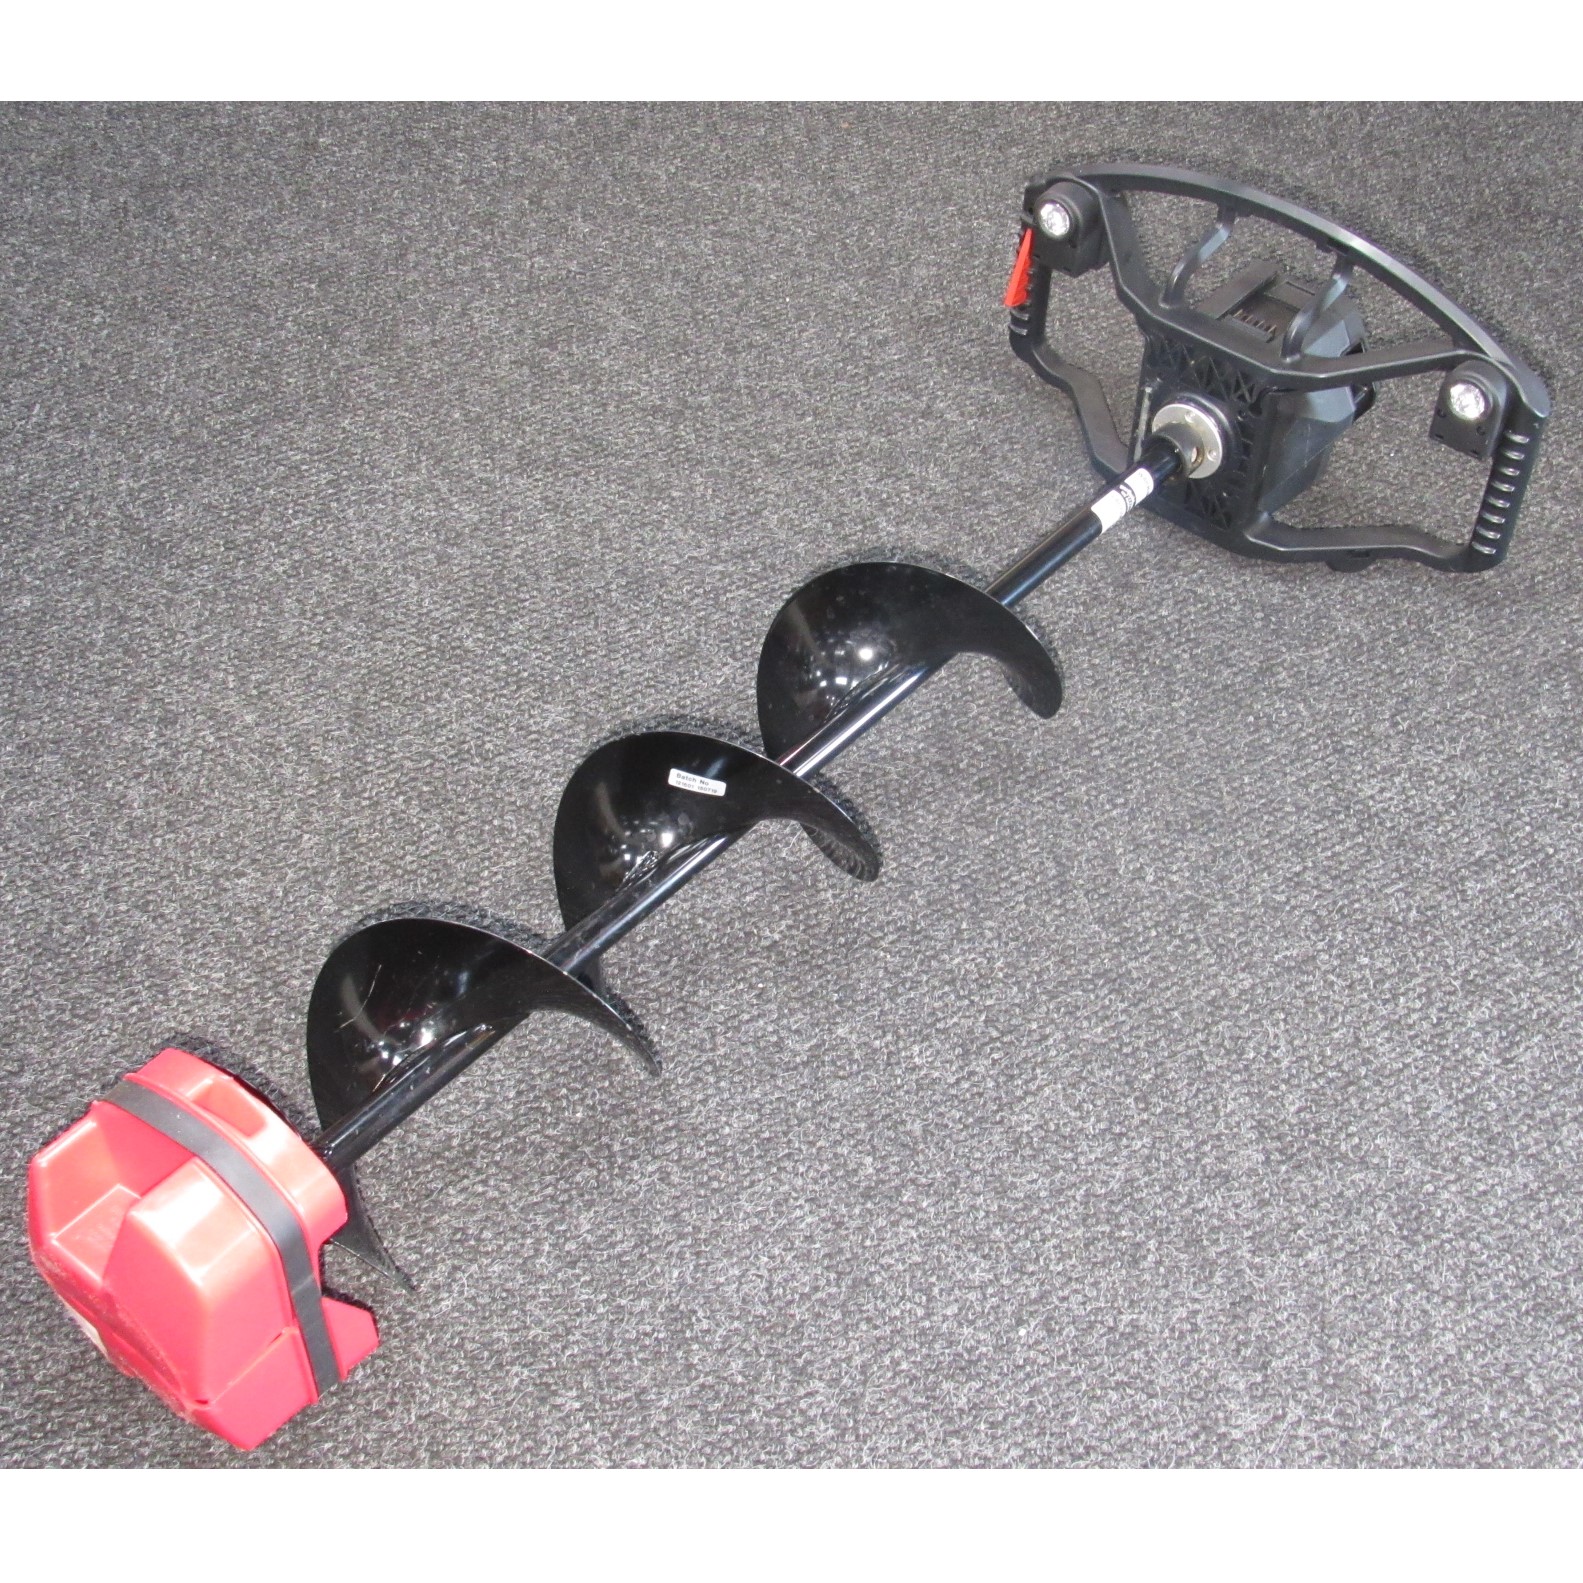 StrikeMaster Ice Augers LFV-PH 40V Lithium-ion Auger - Local Pick-Up Only